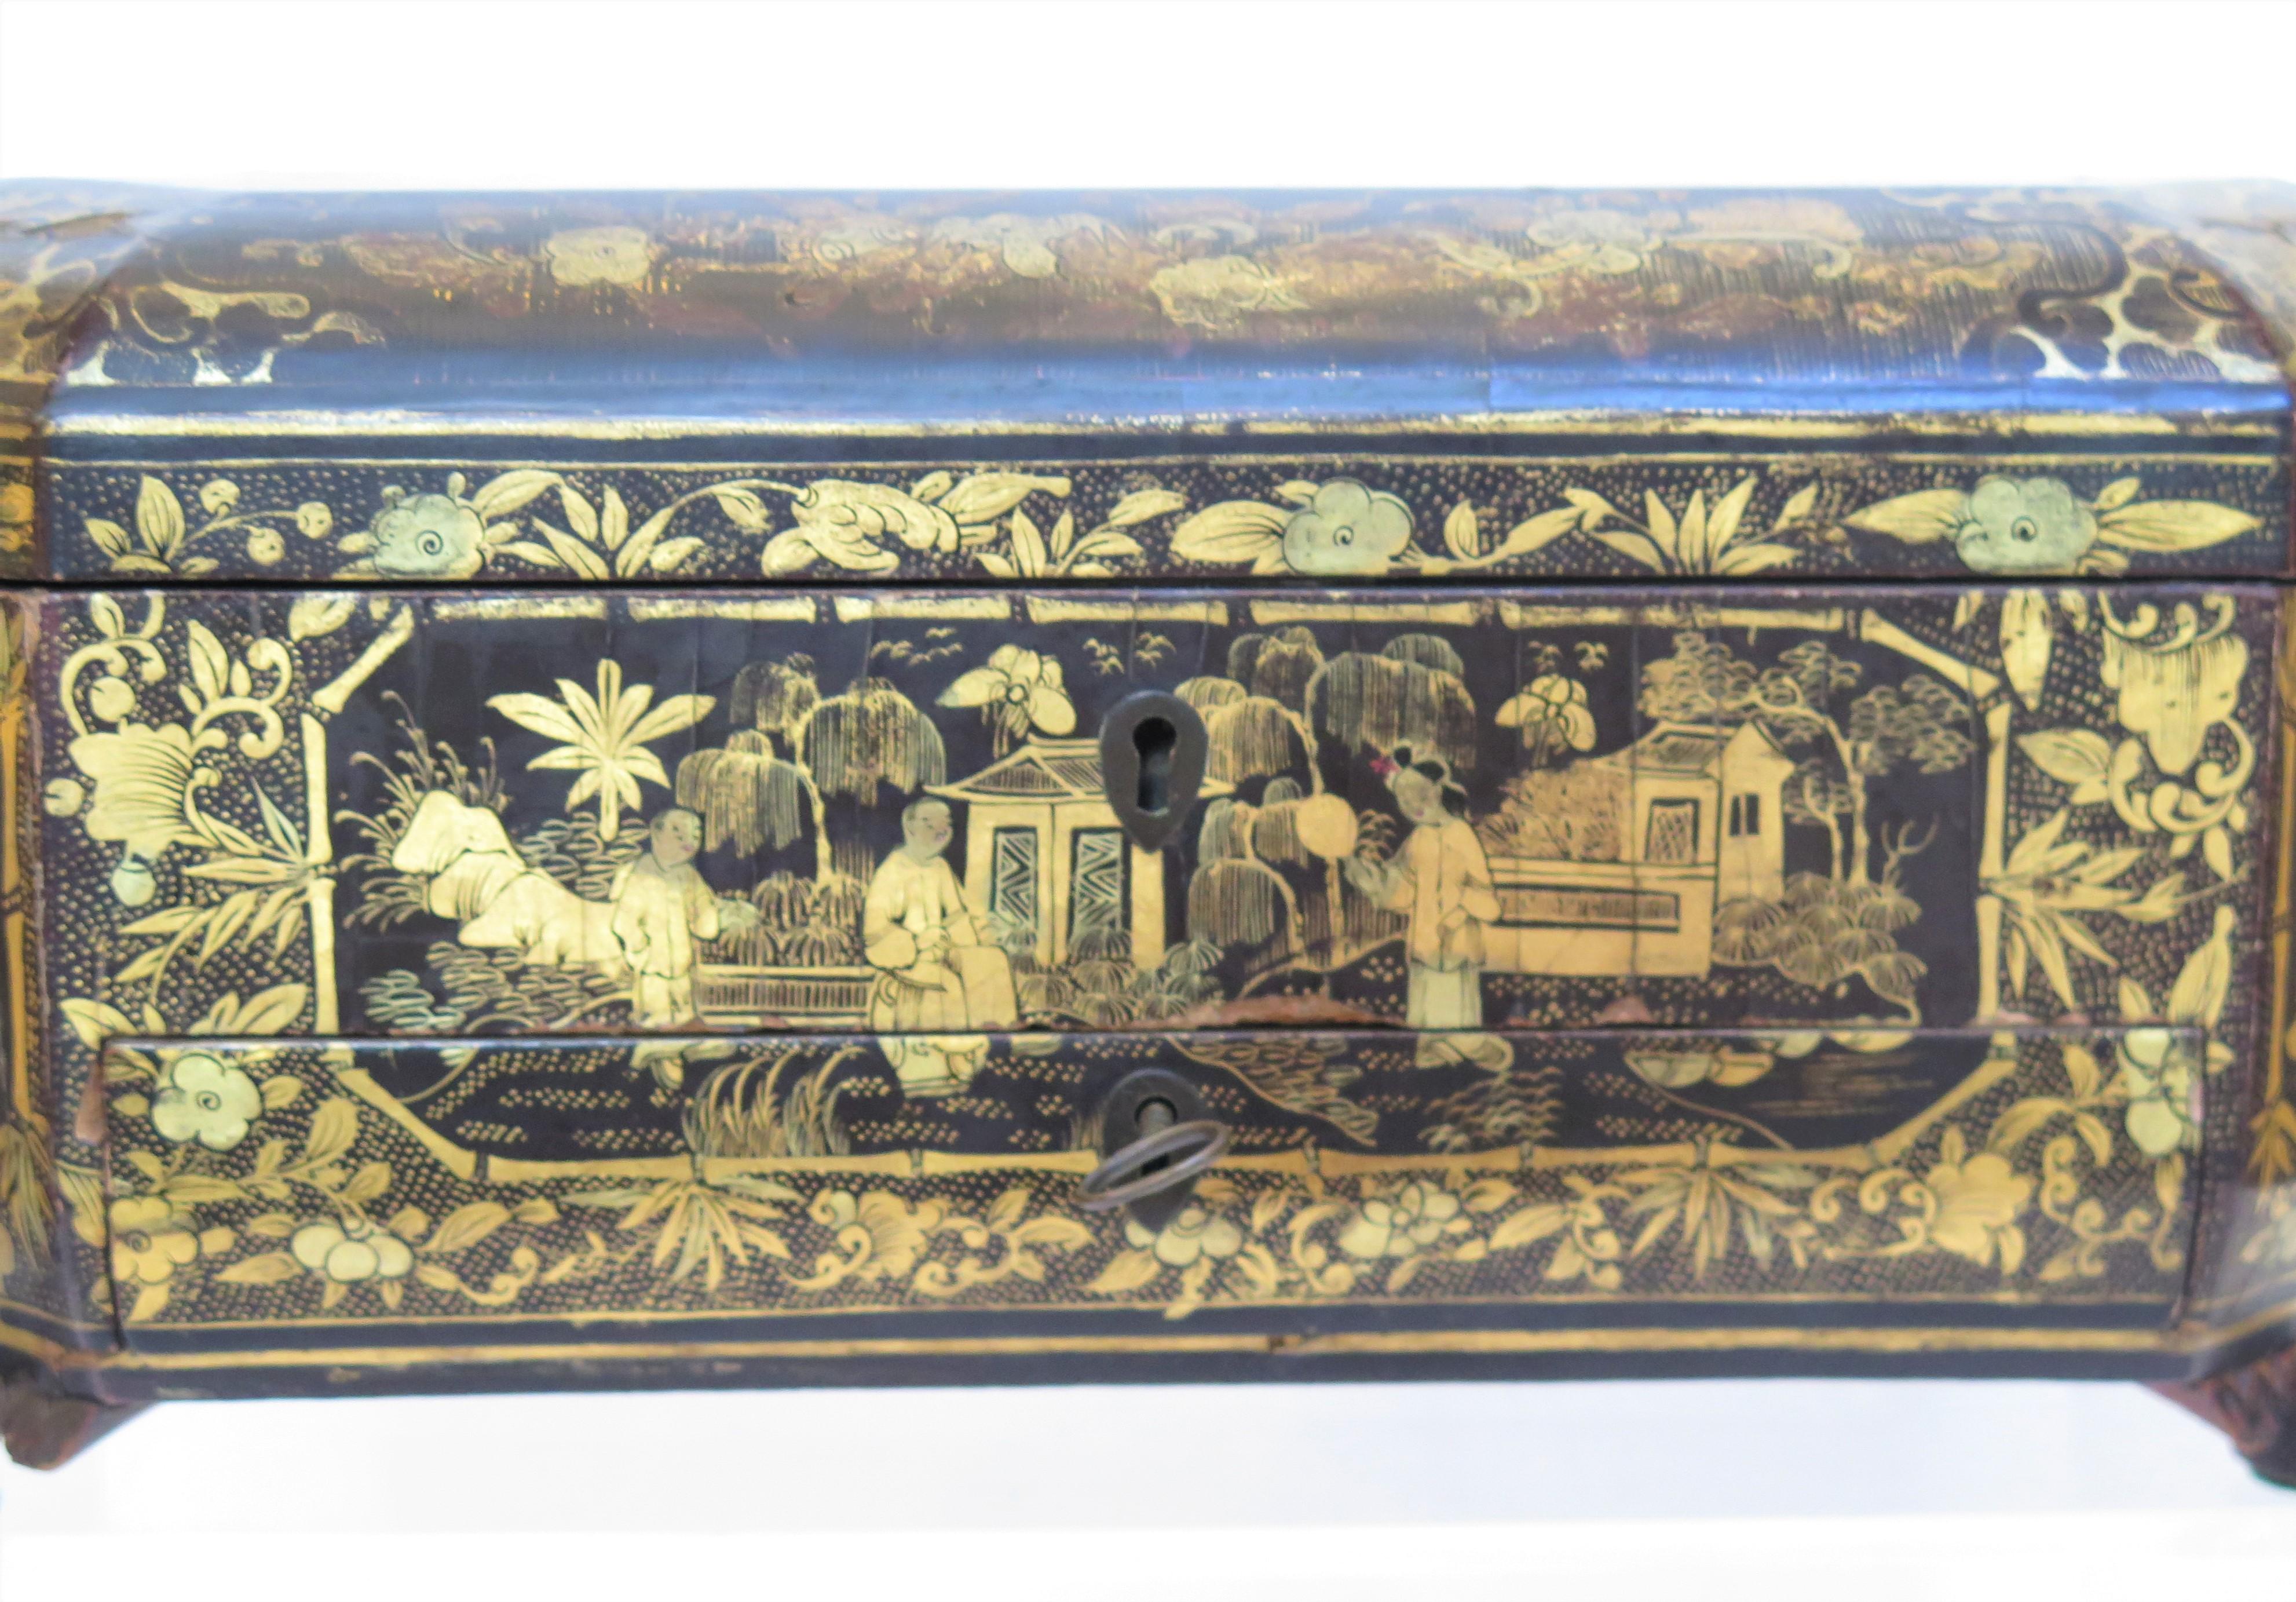 Ealy 19th Century Chinese Export Lacquer Sewing Box For Sale 5